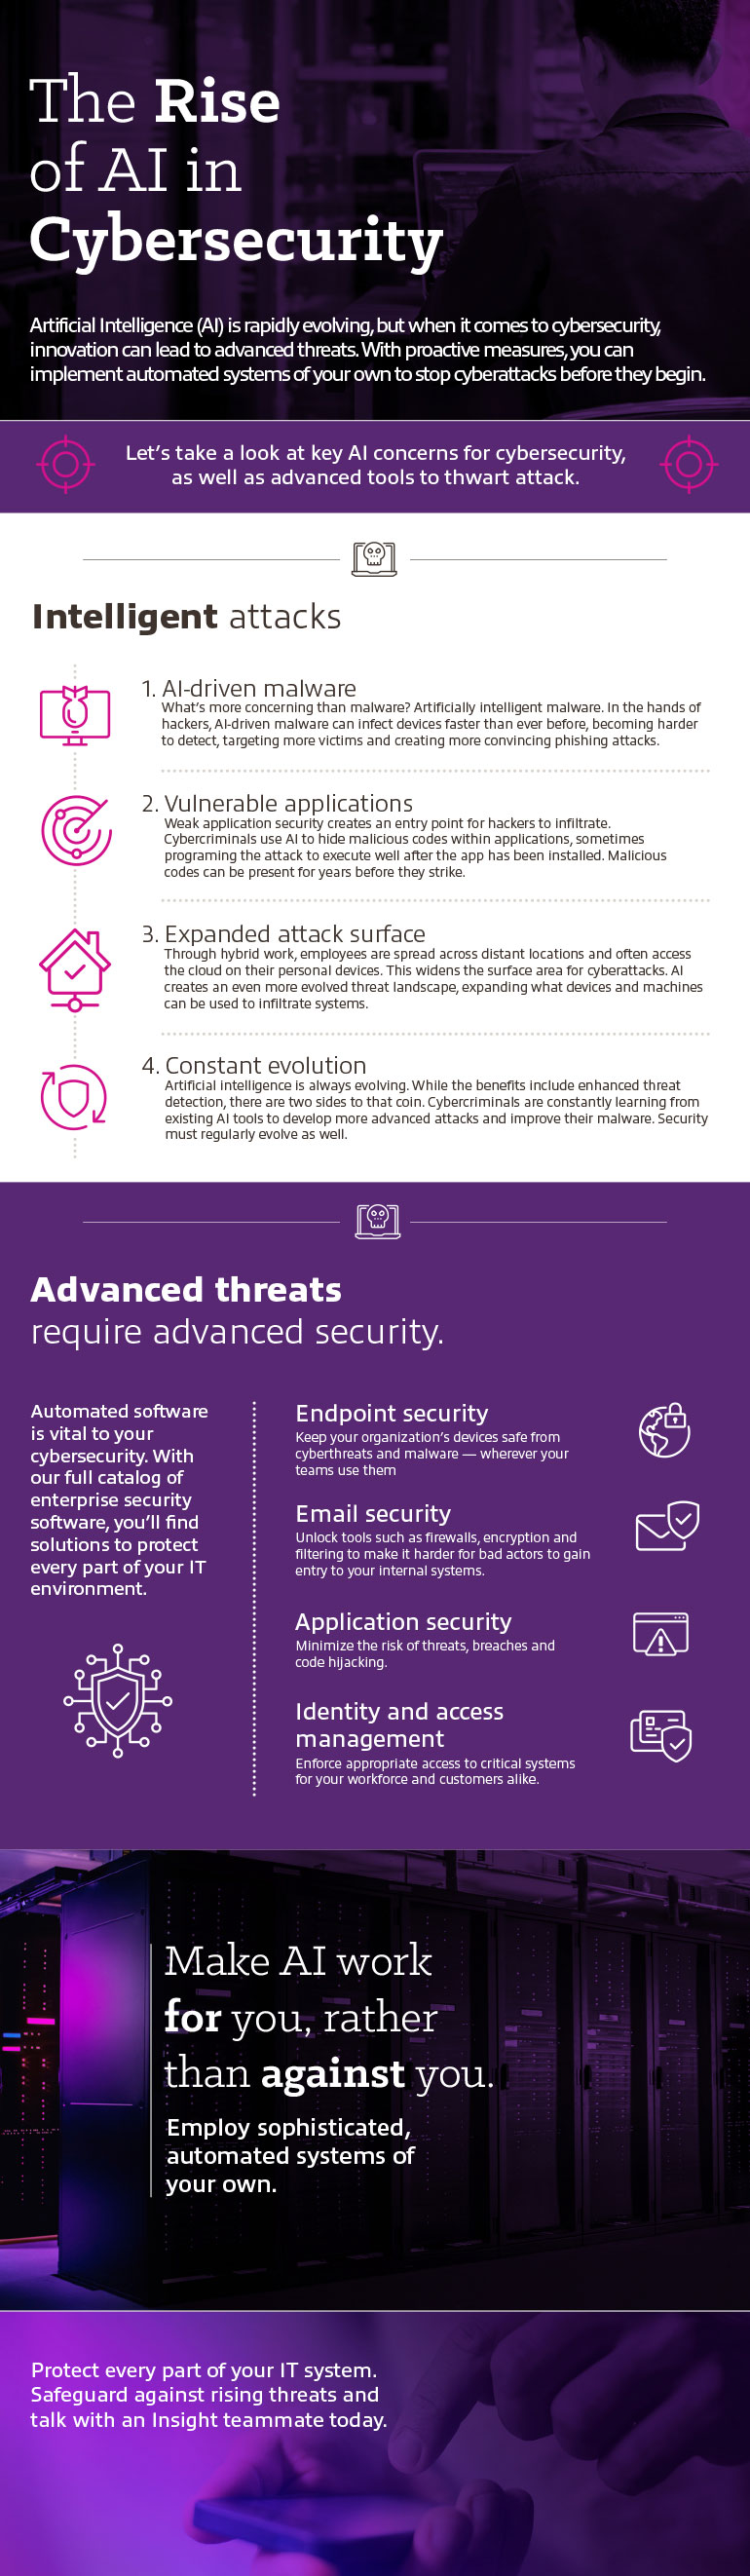 The Rise of AI in Cybersecurity infographic as transcribed below